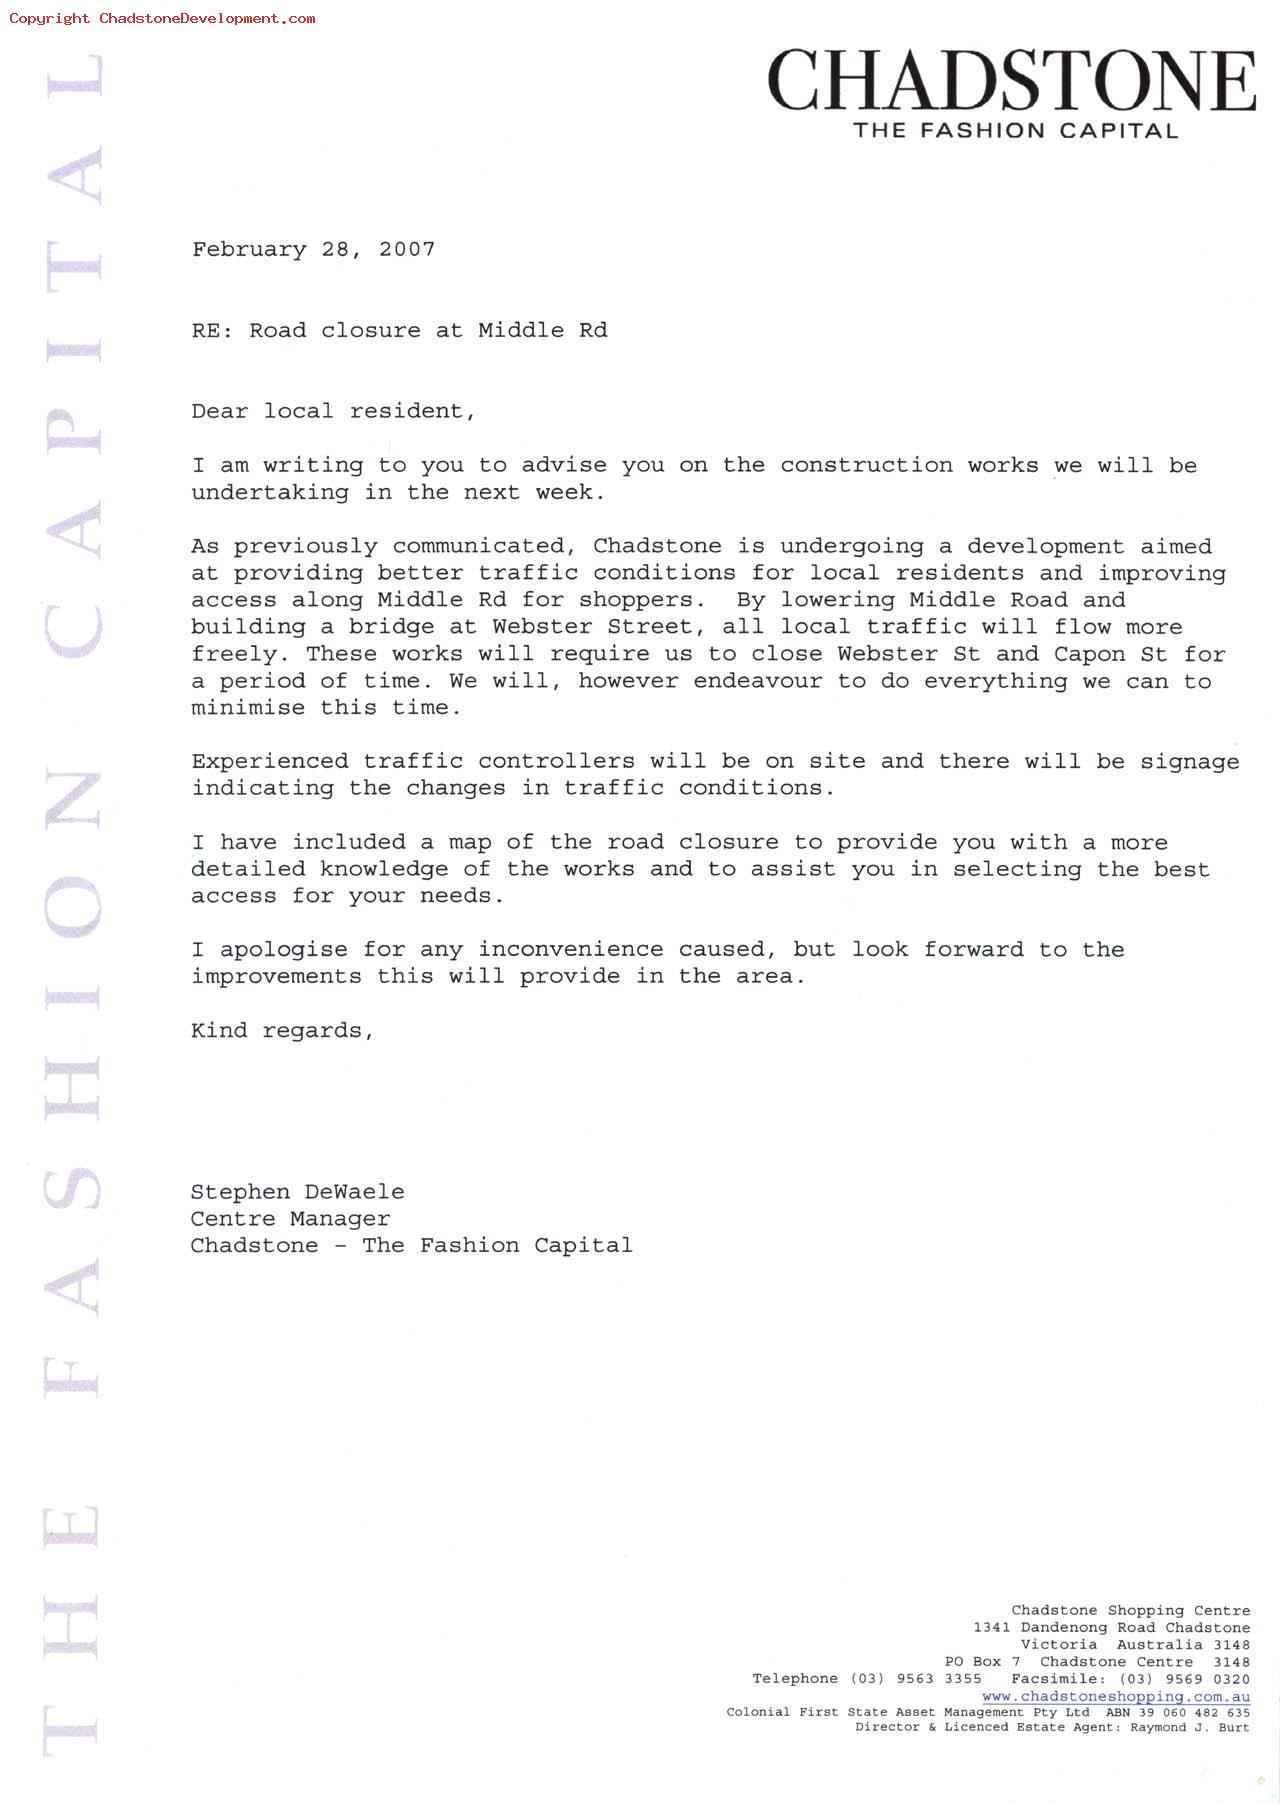 February 2007 - Official Letter (Side 1) - Chadstone Development Discussions